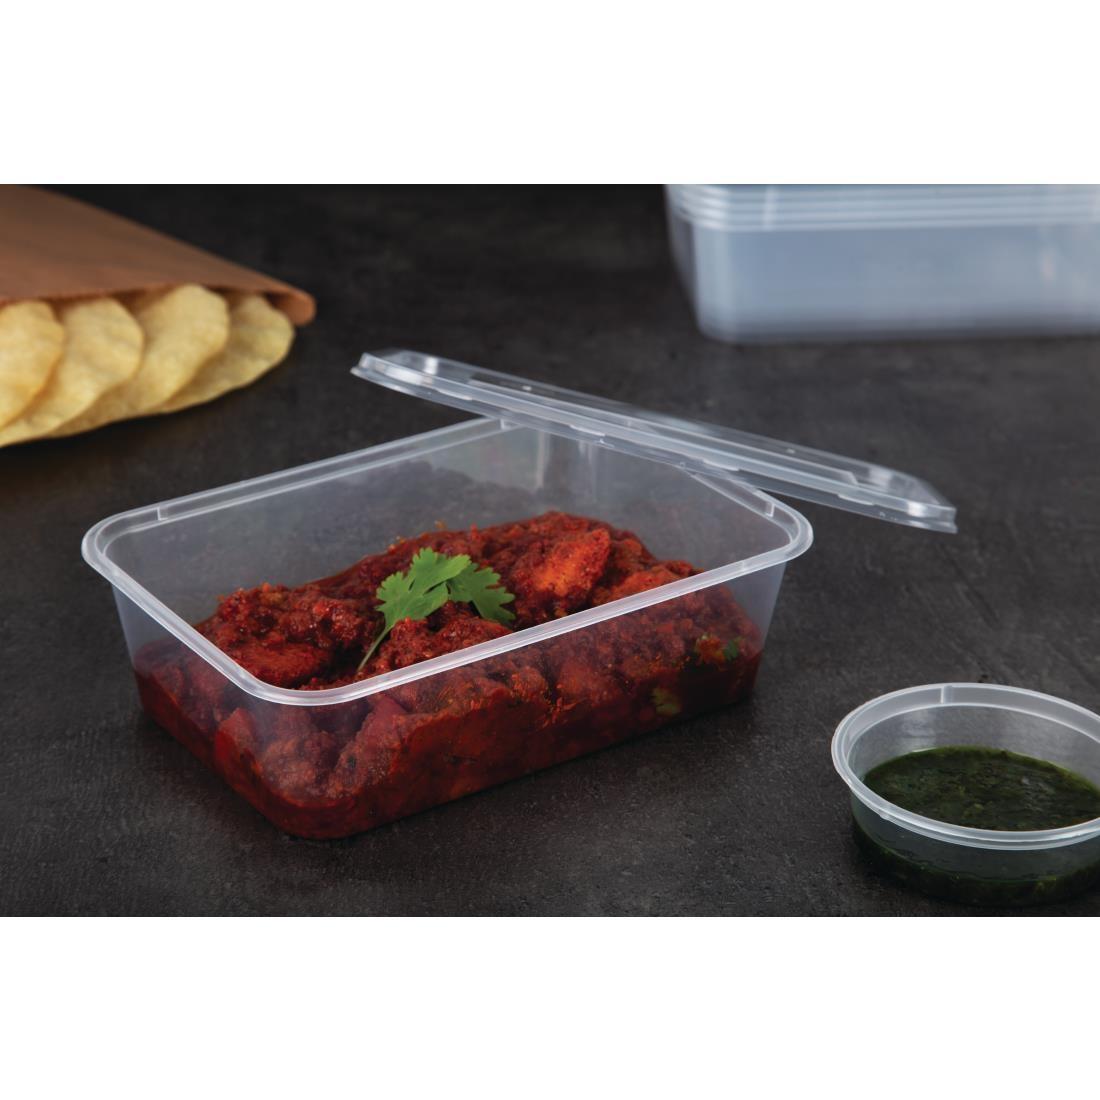 Fiesta Recyclable Plastic Microwavable Containers with Lid Medium 650ml (Pack of 250) - DM182  - 5